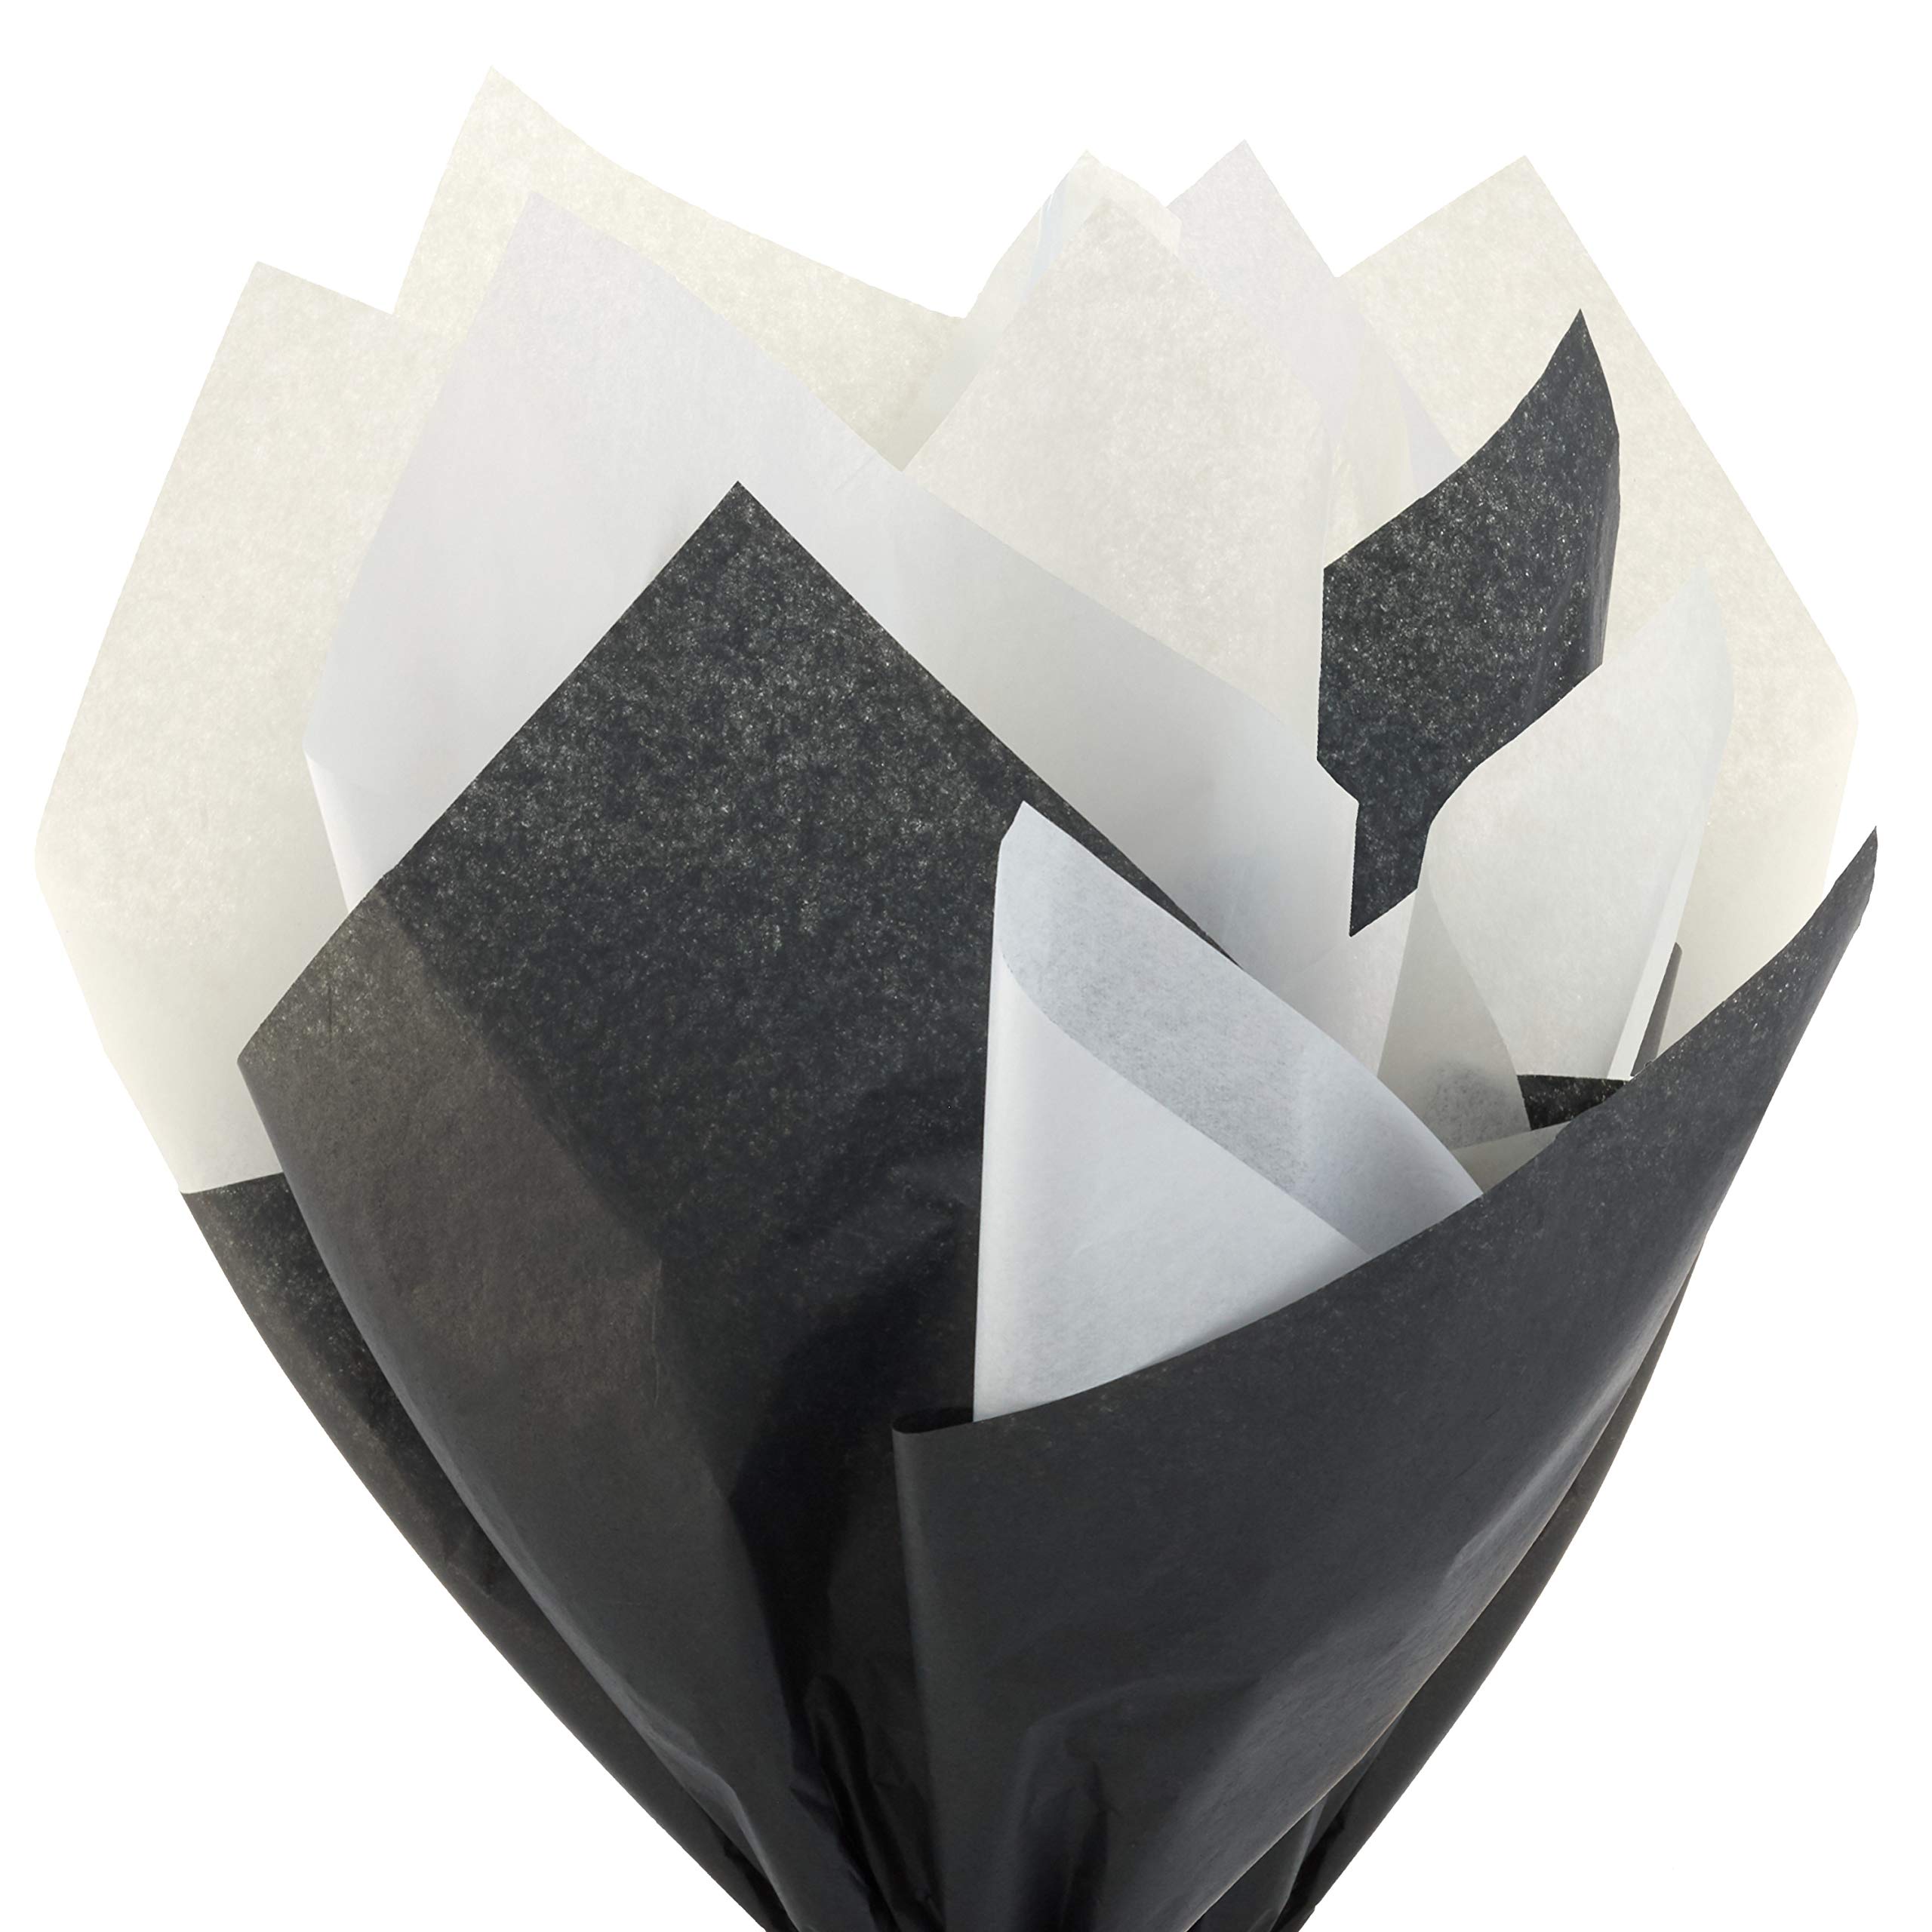 Hallmark White, Black and Ivory Bulk Tissue Paper for Gift Wrapping (120 Sheets) for Gift Bags, Weddings, Graduations, Valentine's Day, Christmas